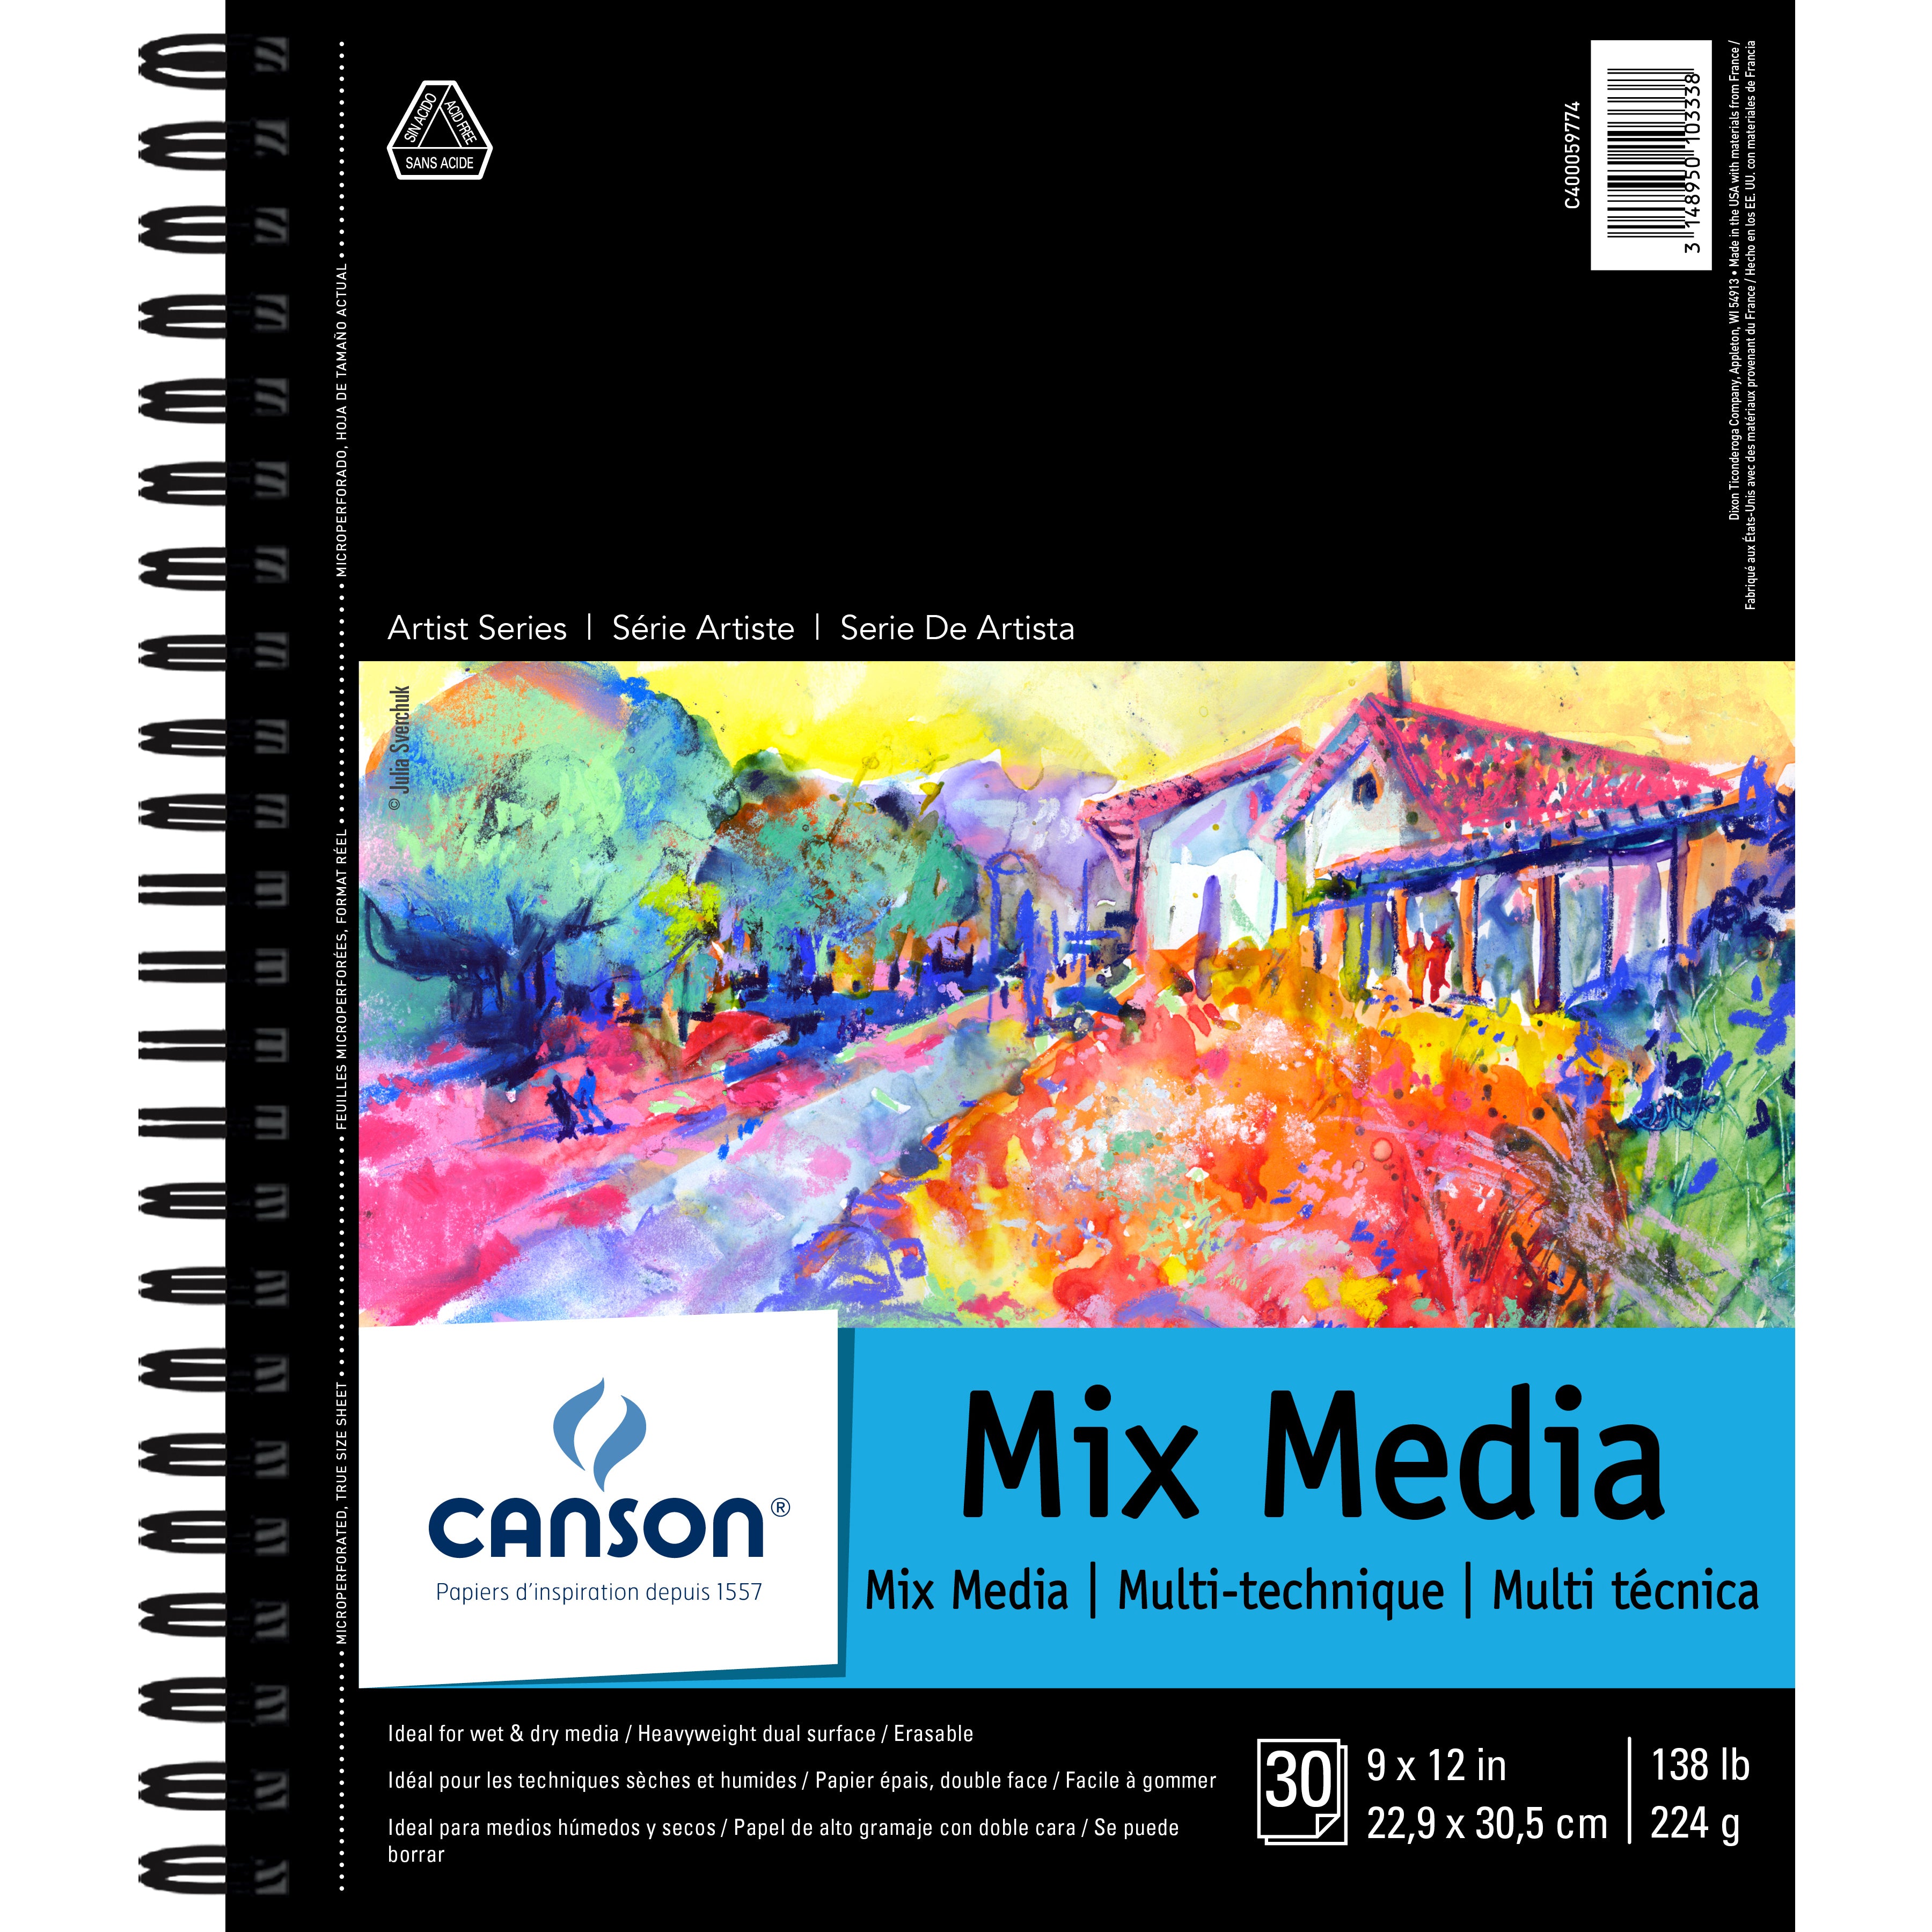 Canson Universal Sketch Paper Pad 5.5 x 8.5 : 100 Sheets